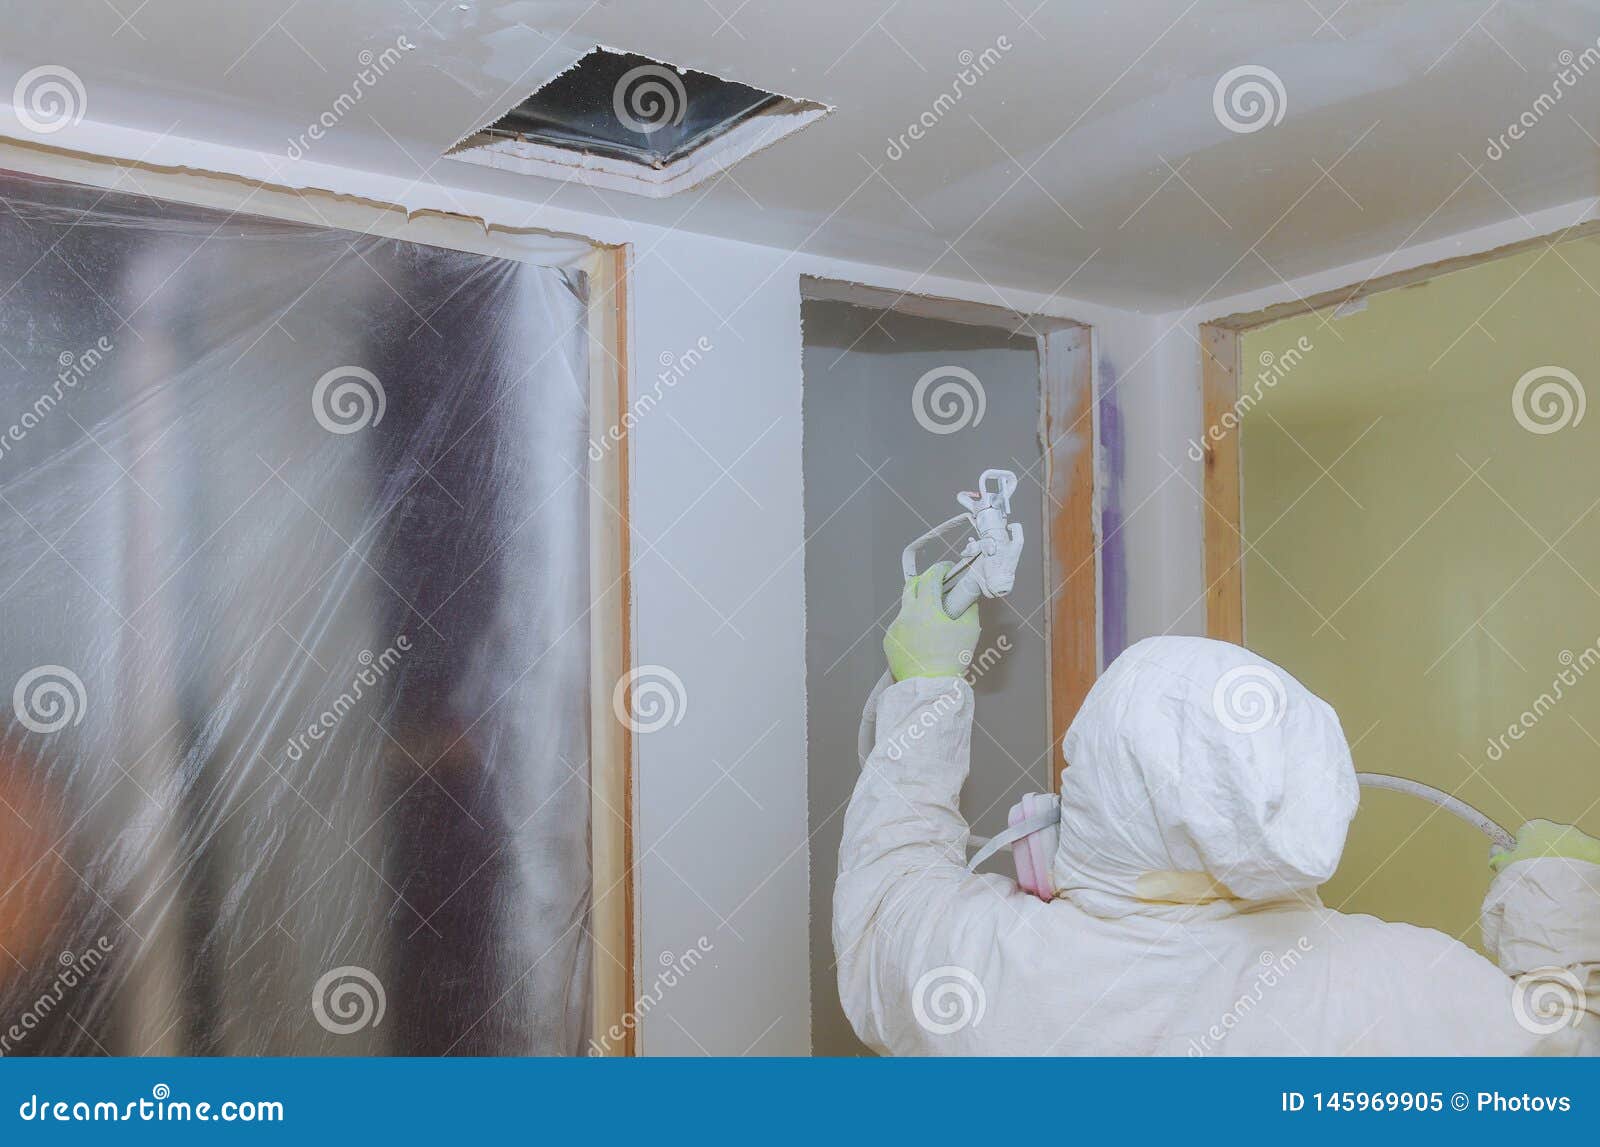 Worker Painting Wall With Spray Gun In White Color Stock Image